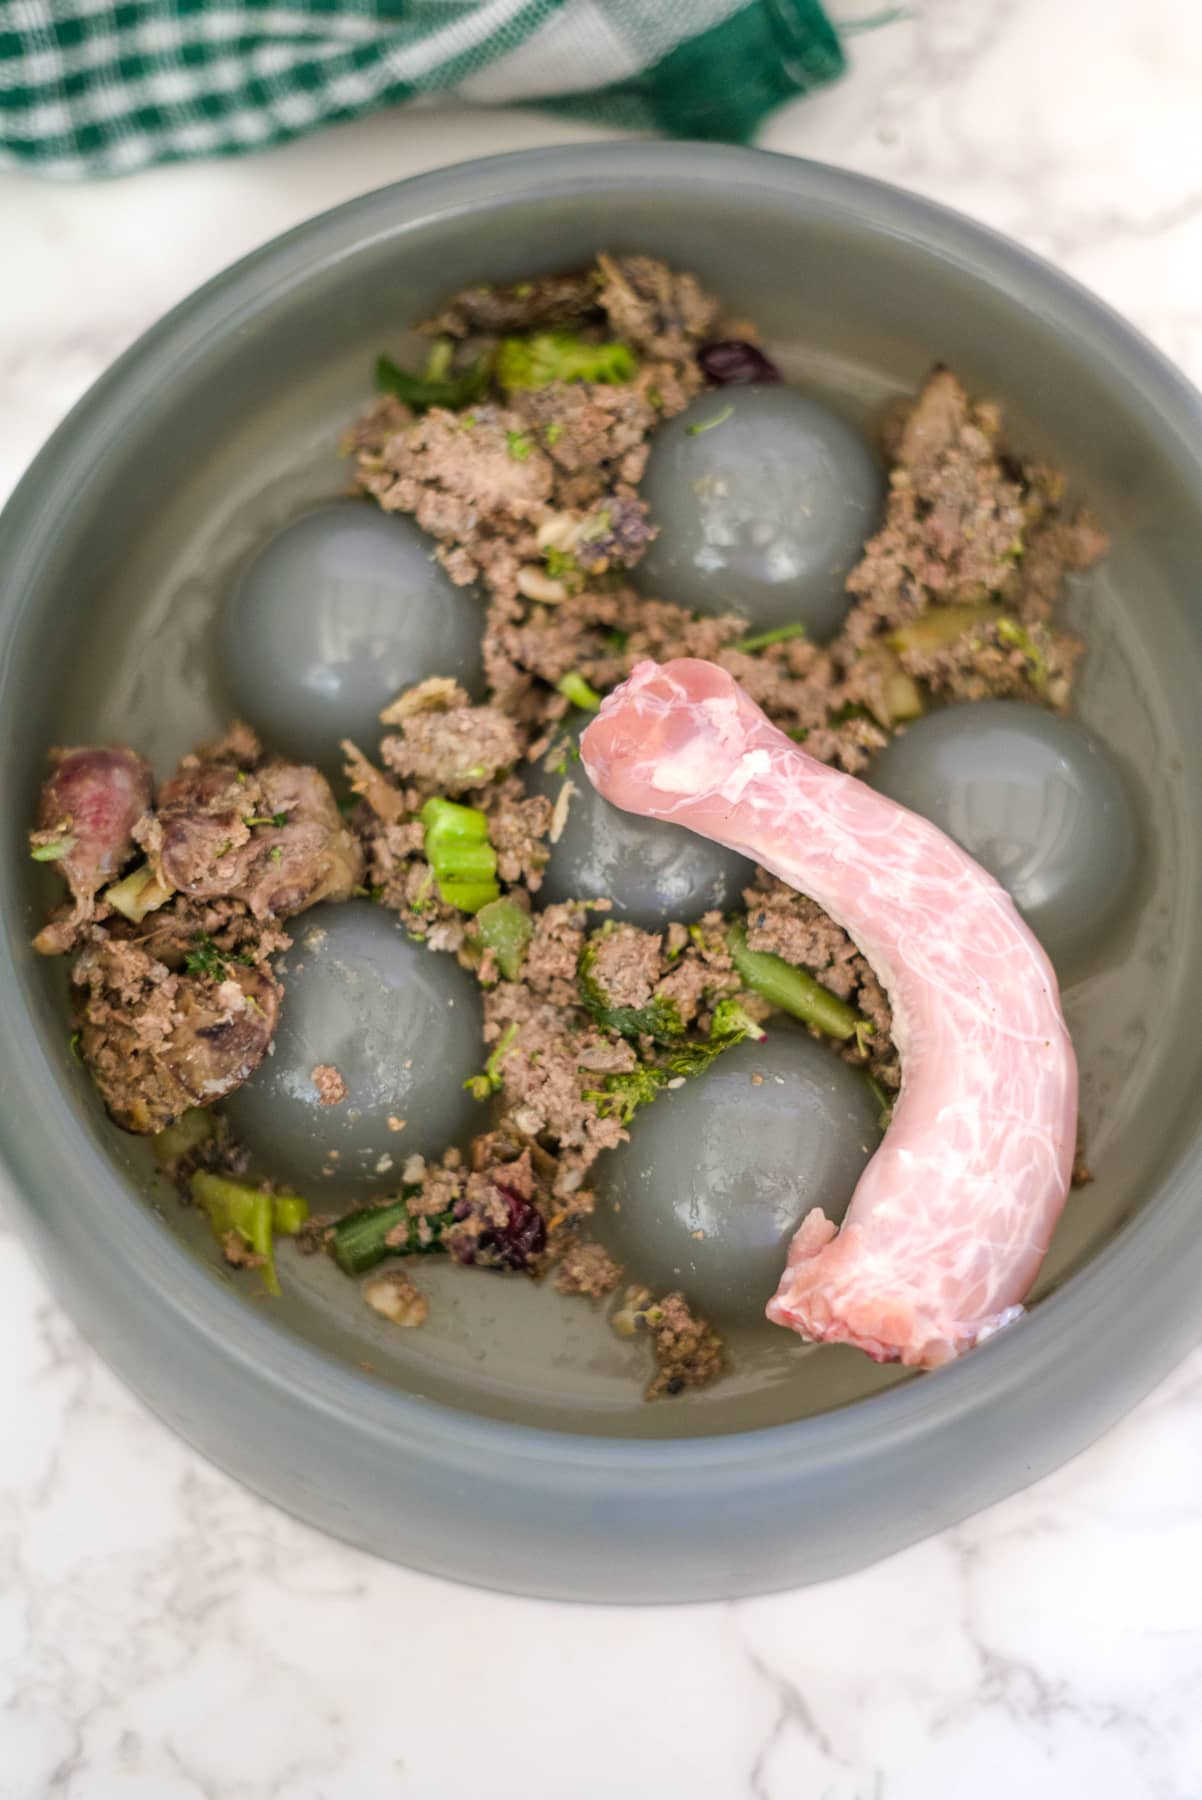 A bowl filled with meat and eggs.